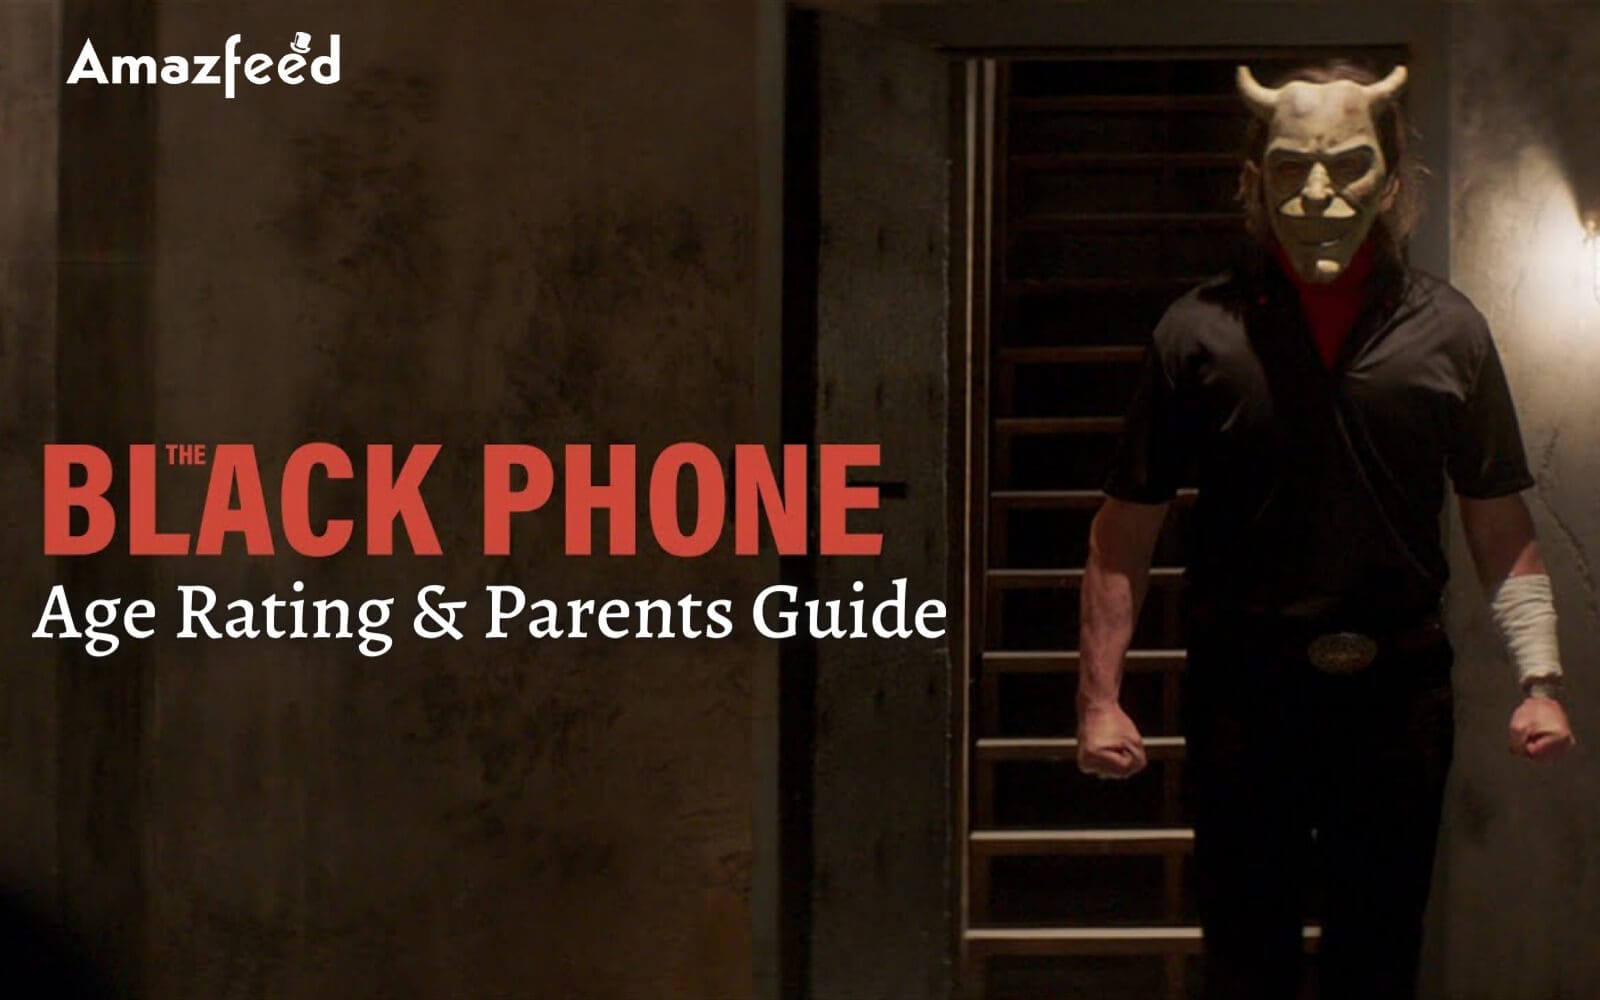 The Black Phone Age Rating & Parents Guide